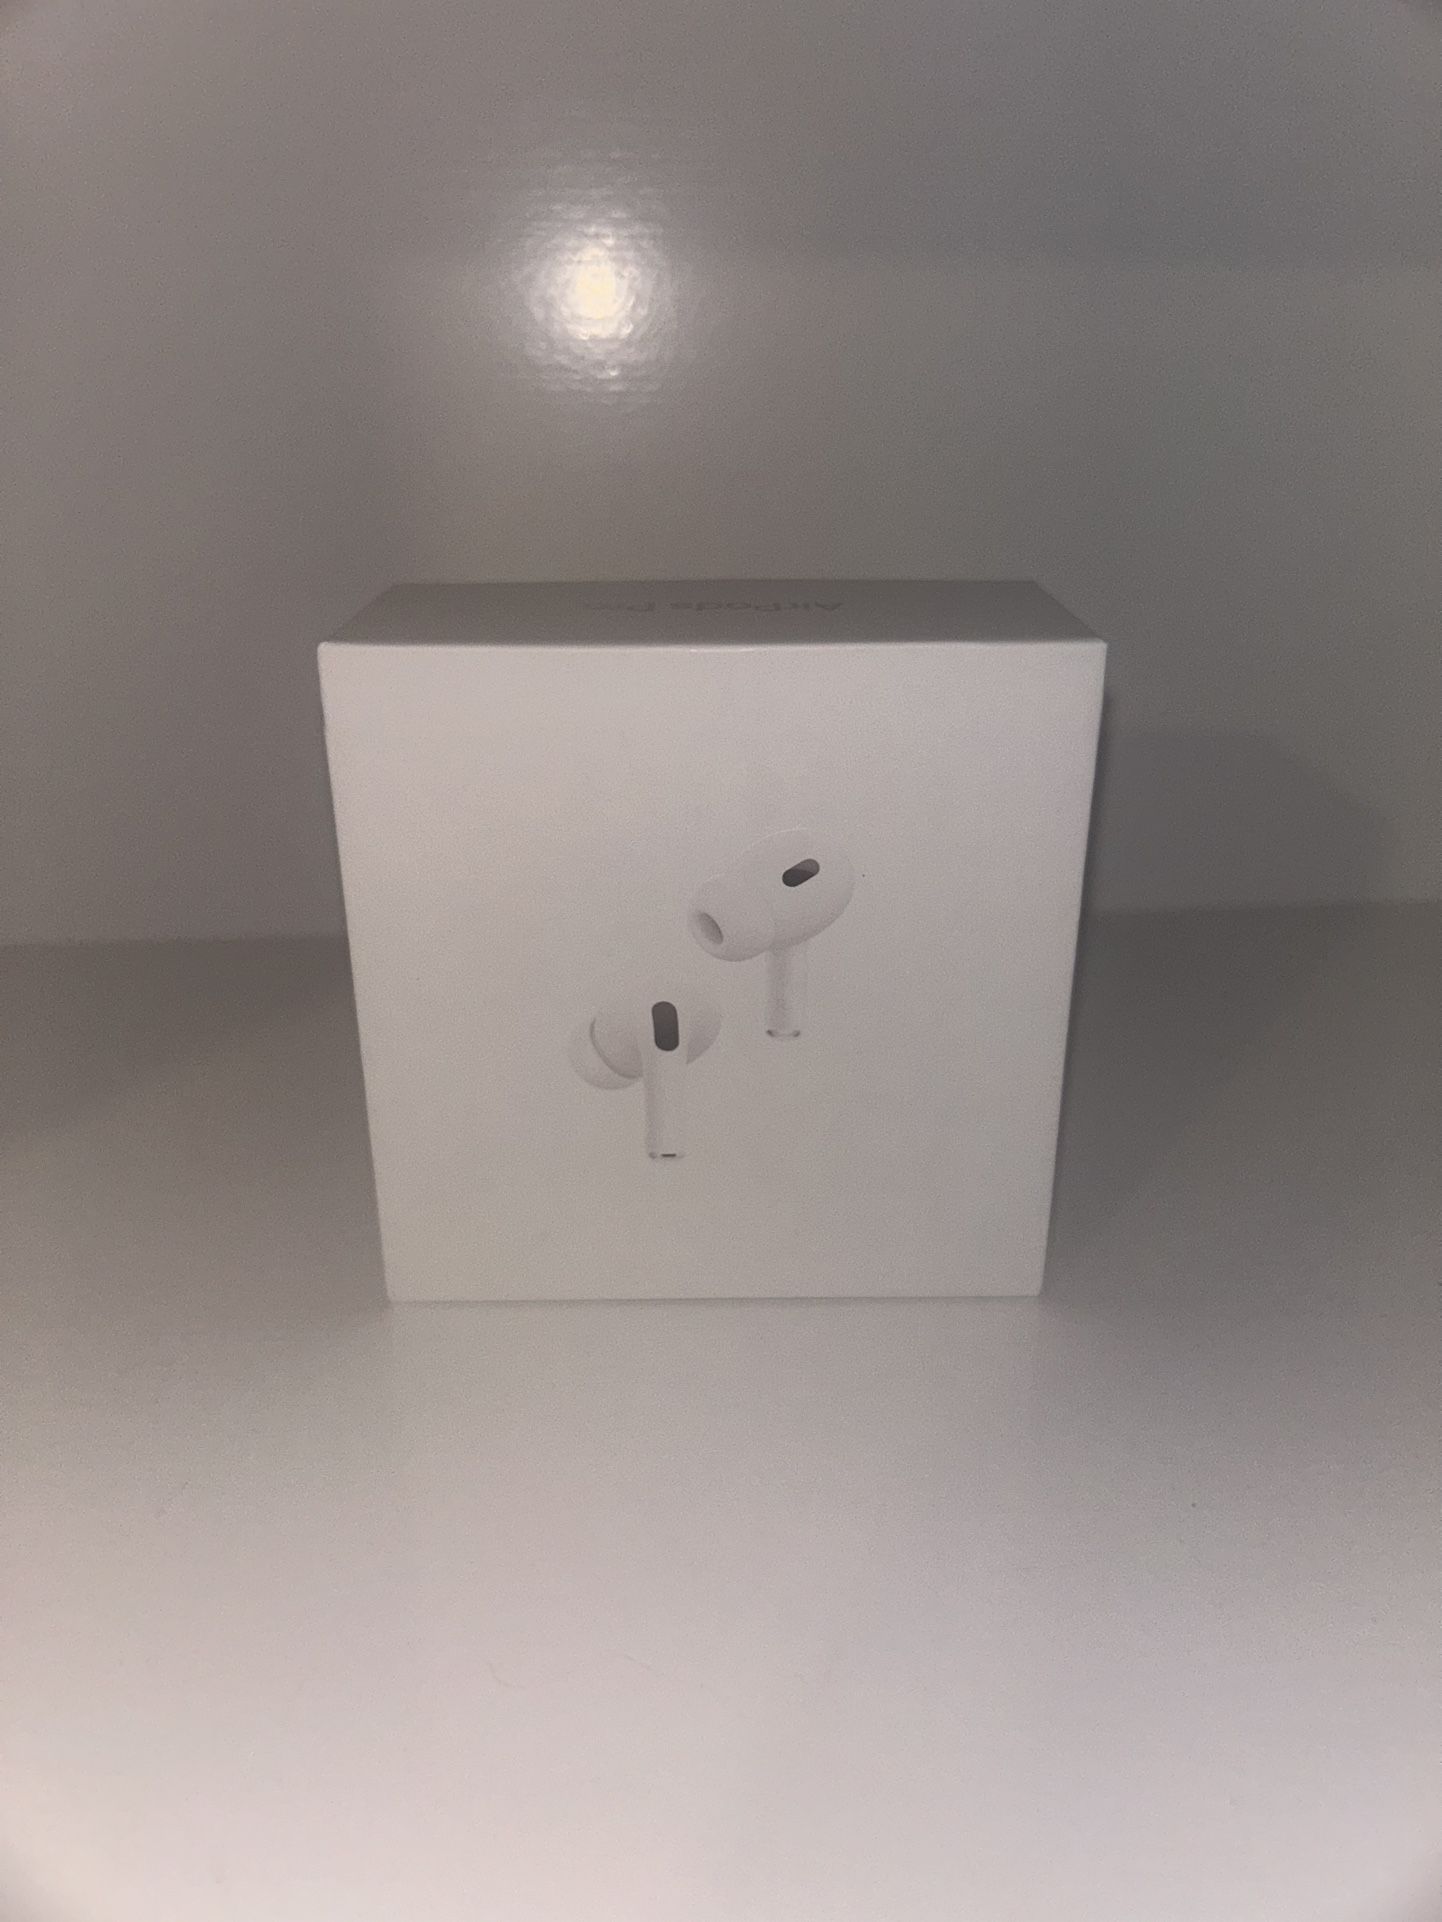 AirPods Pro 2nd Gen With MagSafe Charging Case (USB-C) Brand New Receipt In 3rd Photo Ships Same Day Or Next Day (Send Best Offer) 